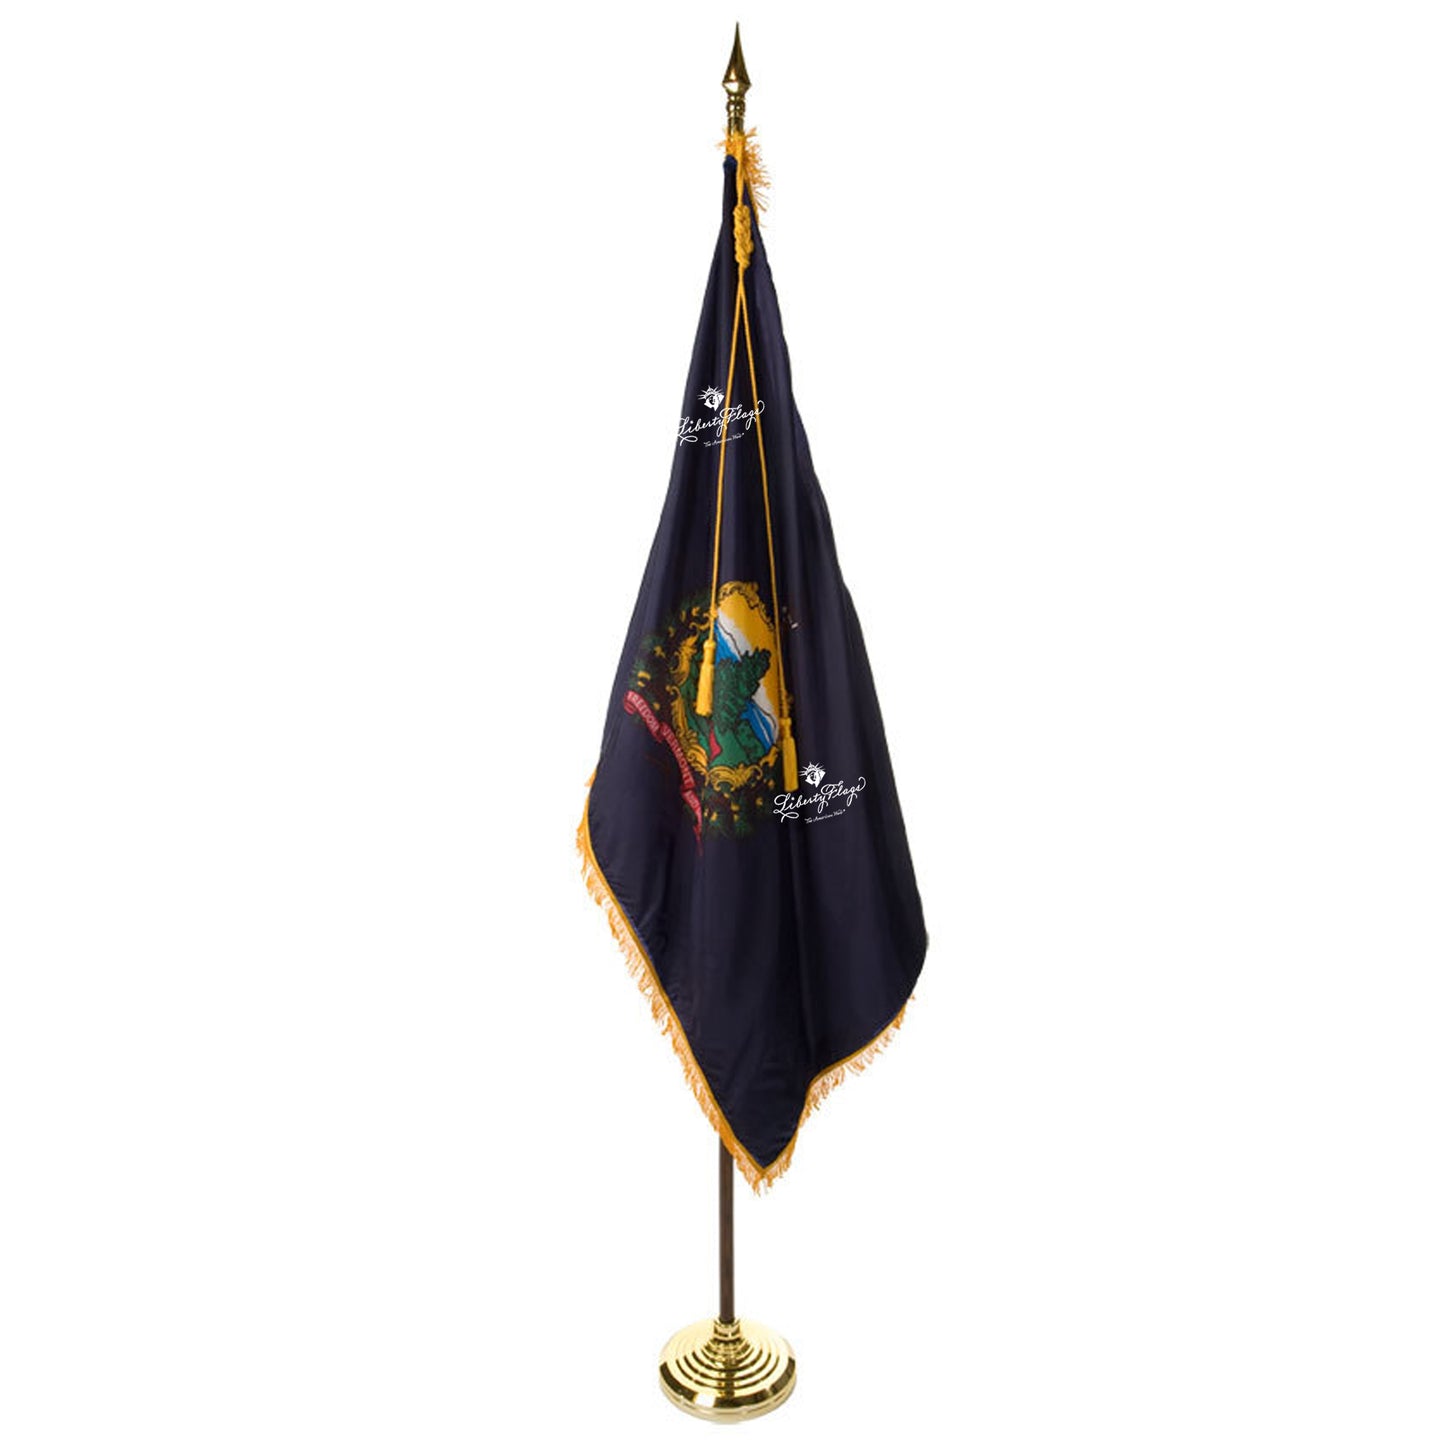 Vermont Ceremonial Flags and Sets